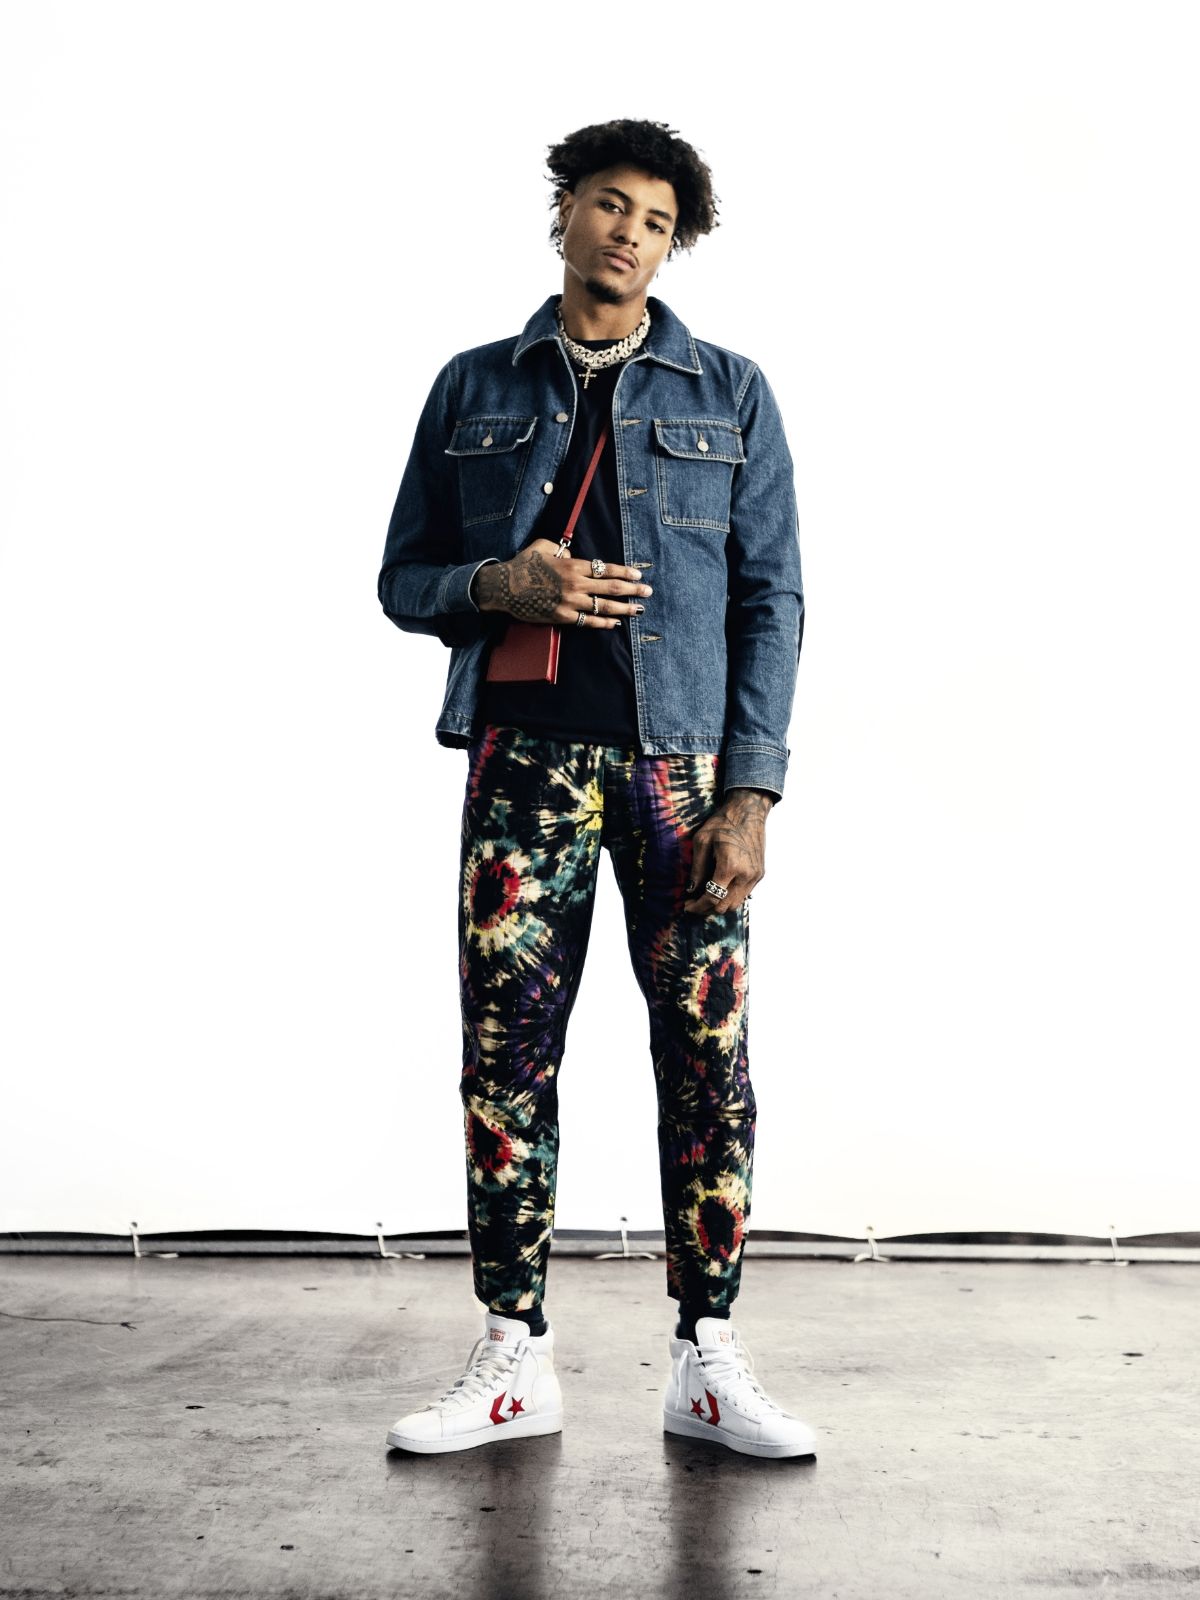 Kelly Oubre Jr standing wearing denim jacket, tie dyed pants and Converse Pro Leather high top sneakers